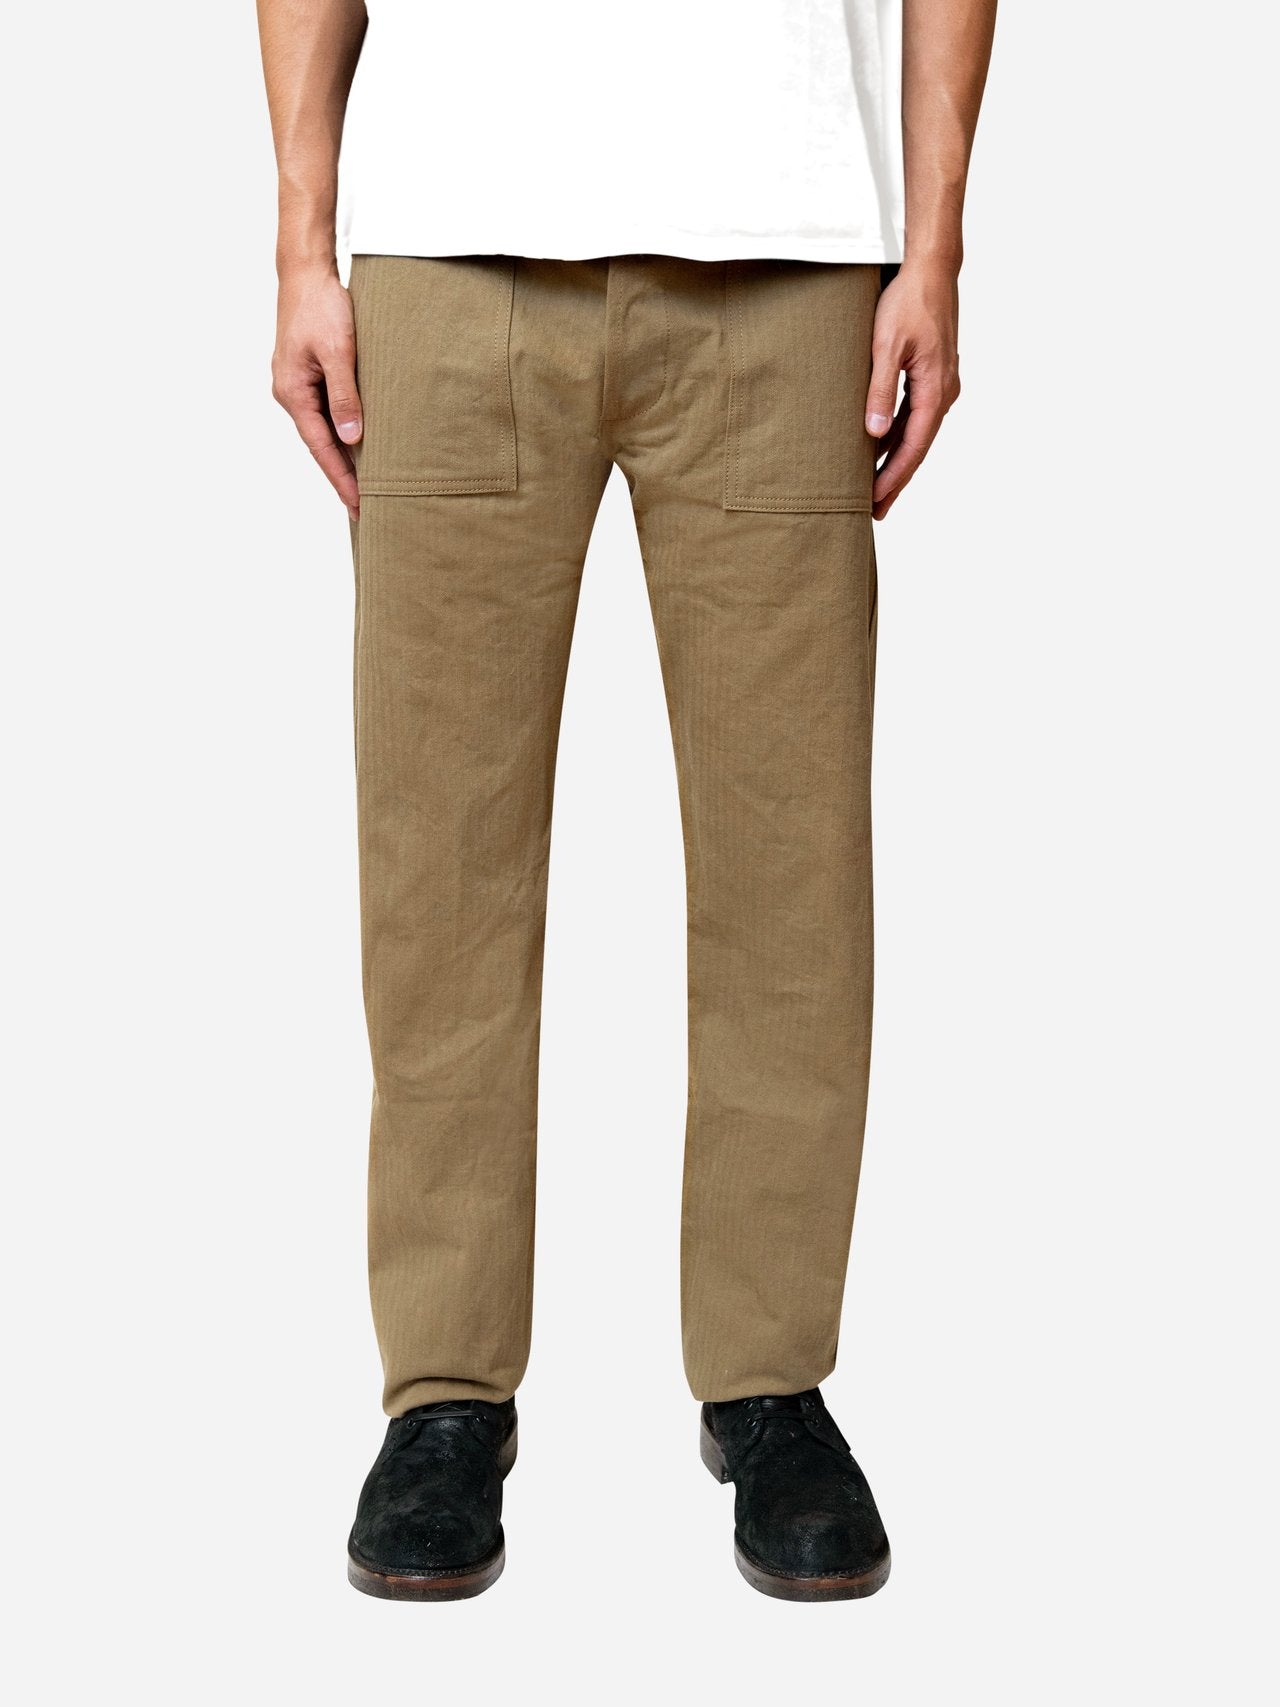 3Sixteen Fatigue Pant in Coyote HBT